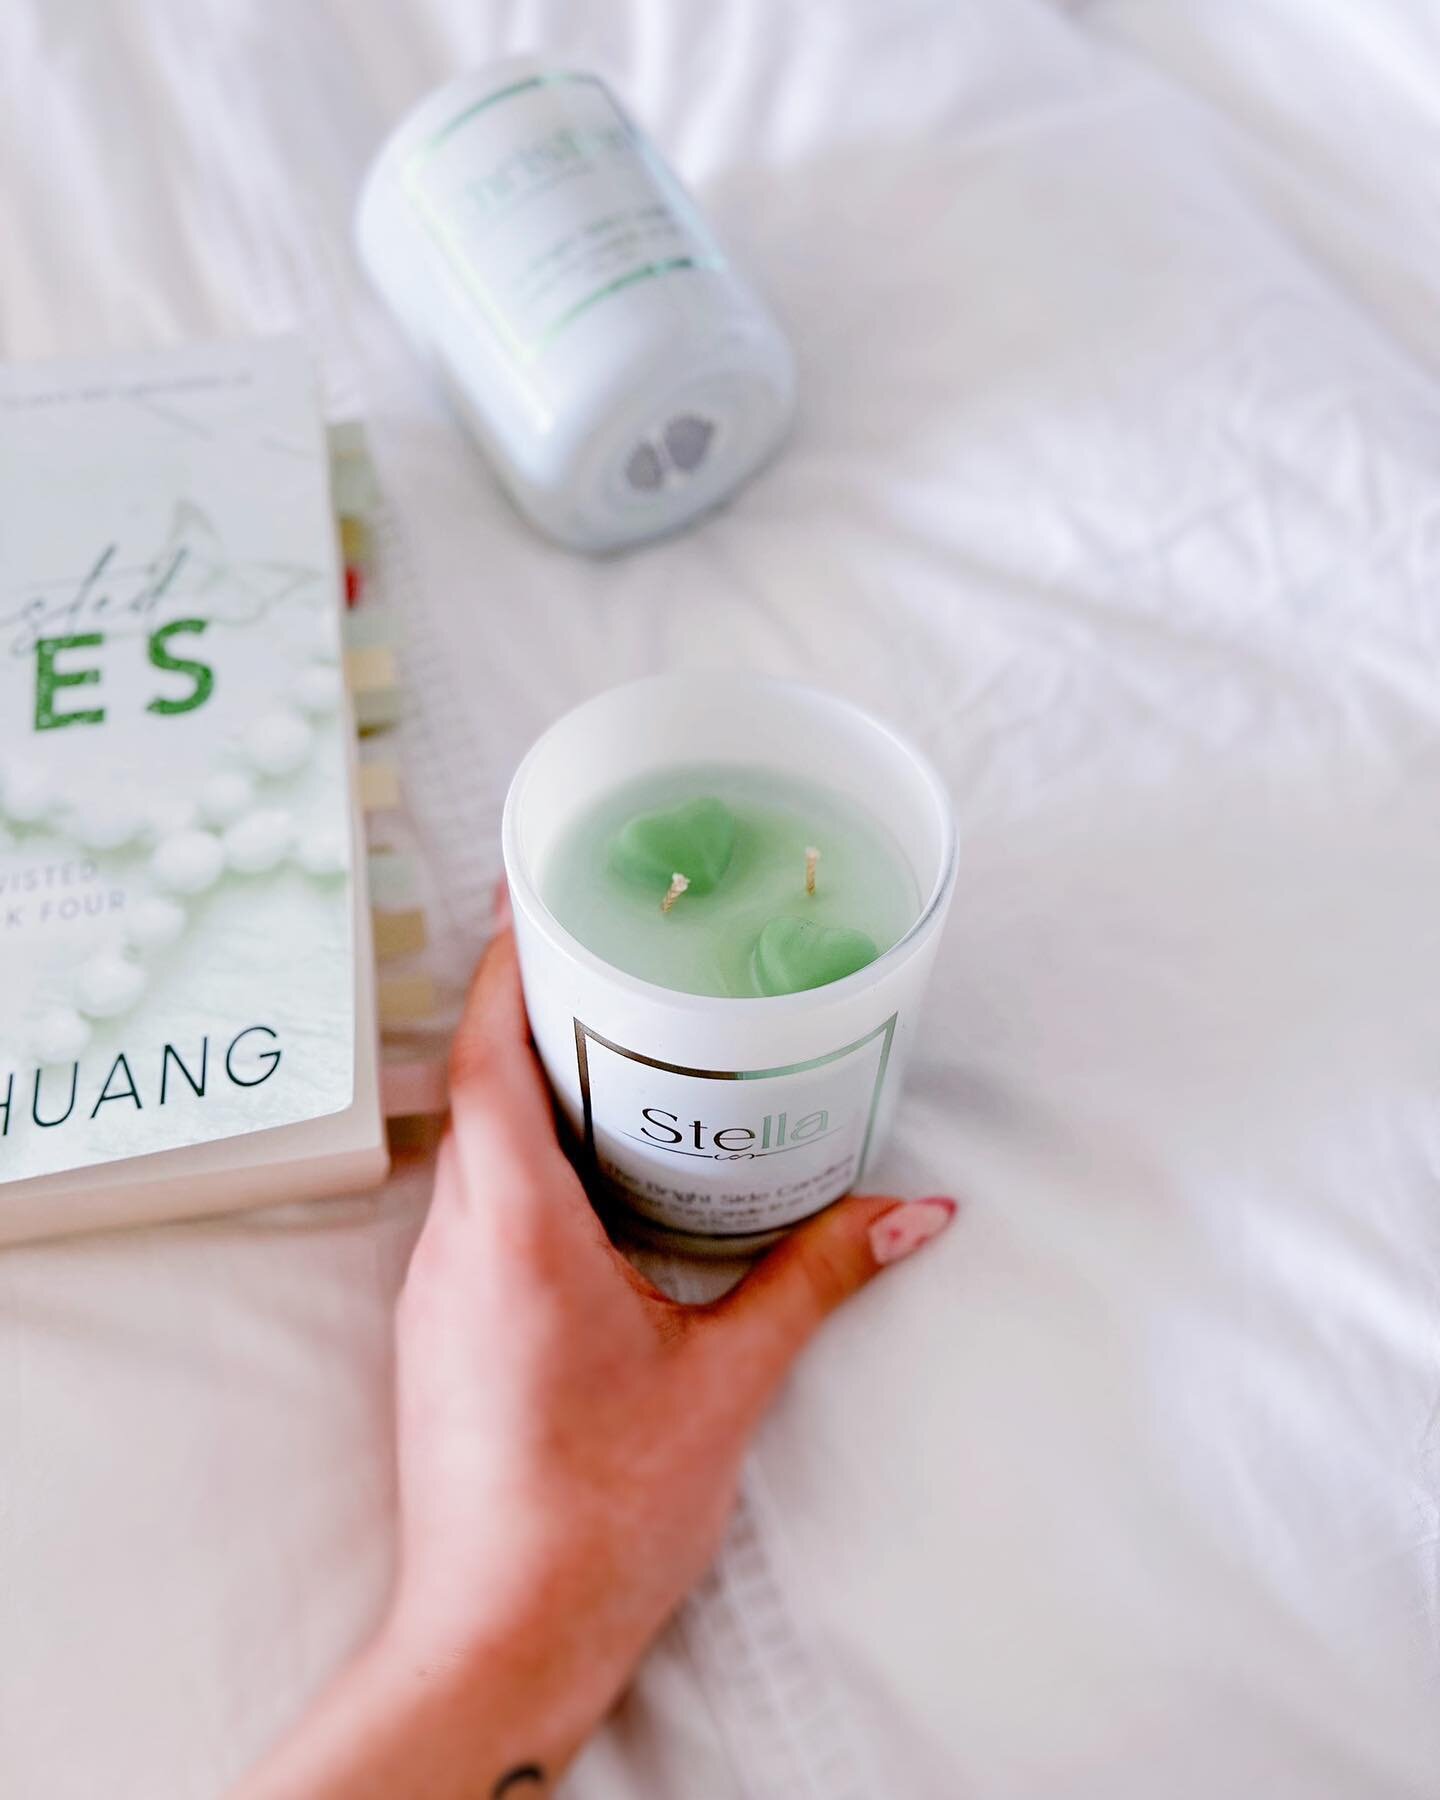 it&rsquo;s the simple things in life. 

Stella Candle: @thebrightsidecandles 🌱🪩💚
Use my discount code: PPF21 for 10% off! 
.⁣
.⁣
.⁣
.⁣
.⁣
#twistedgames #twistedhate #twistedlies #twistedseriesanahuang #twistedlove #twistedseries #candles #candlema